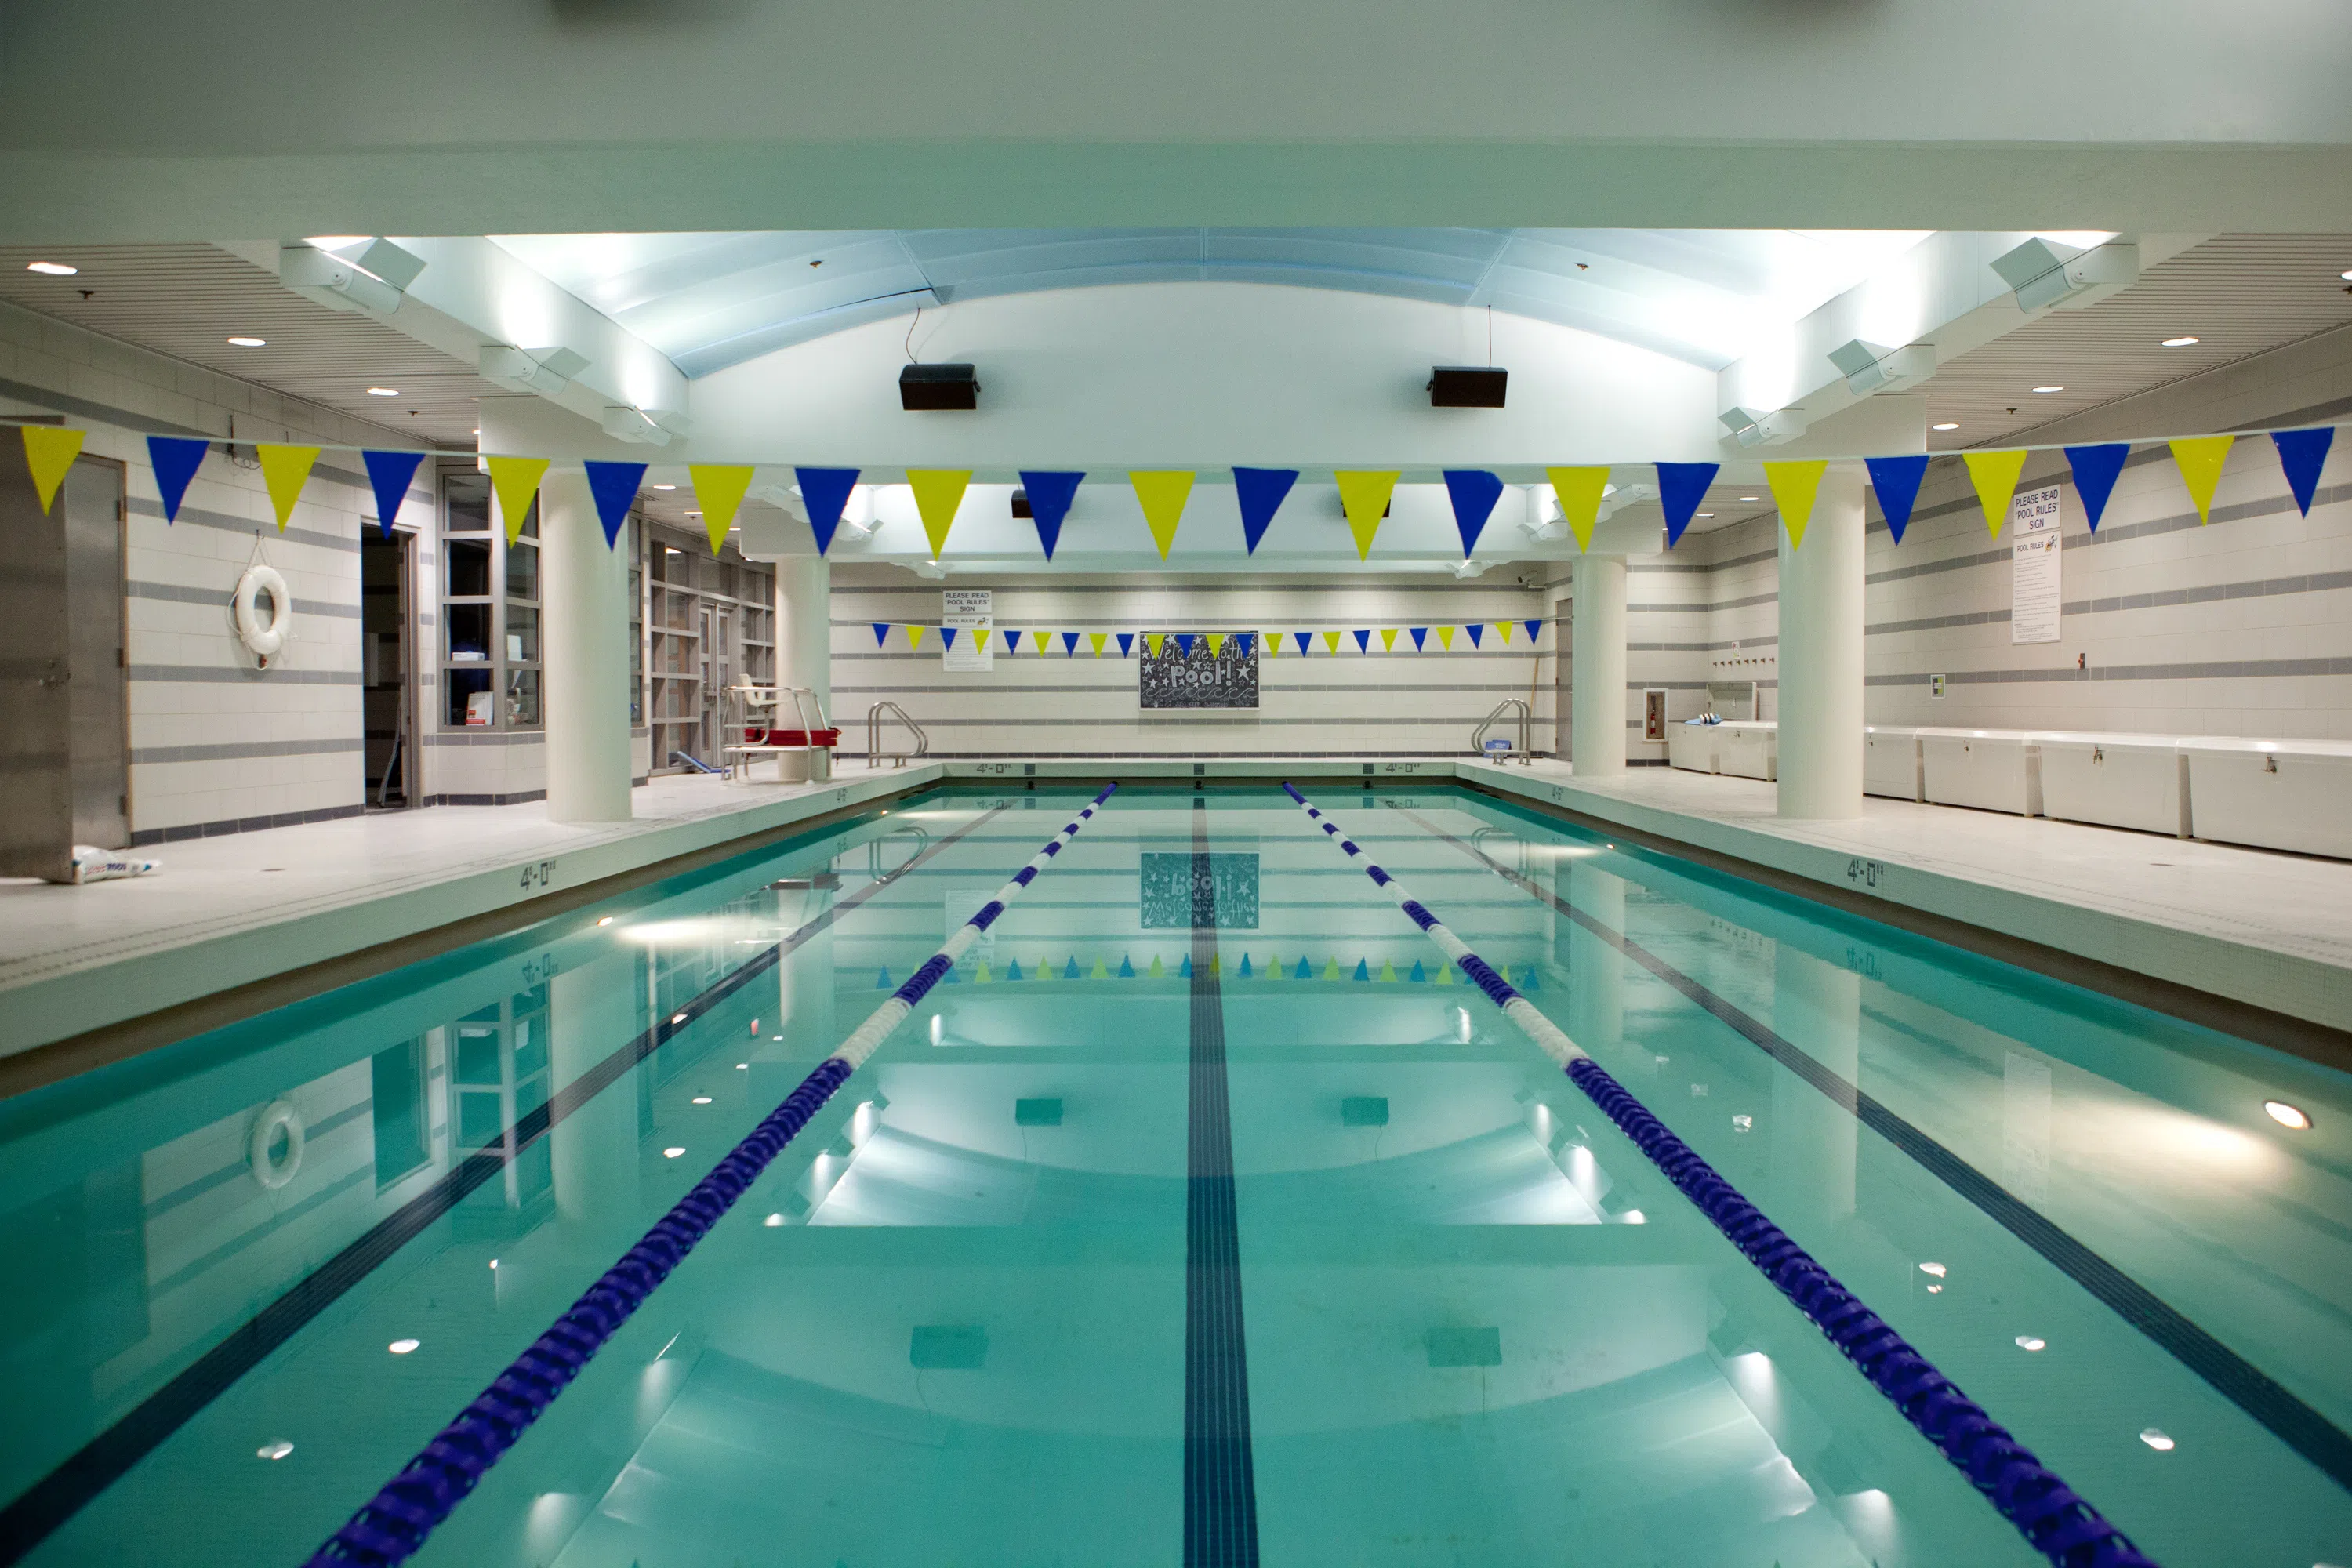 Swimming pool inside of Learner Health and Wellness Center.